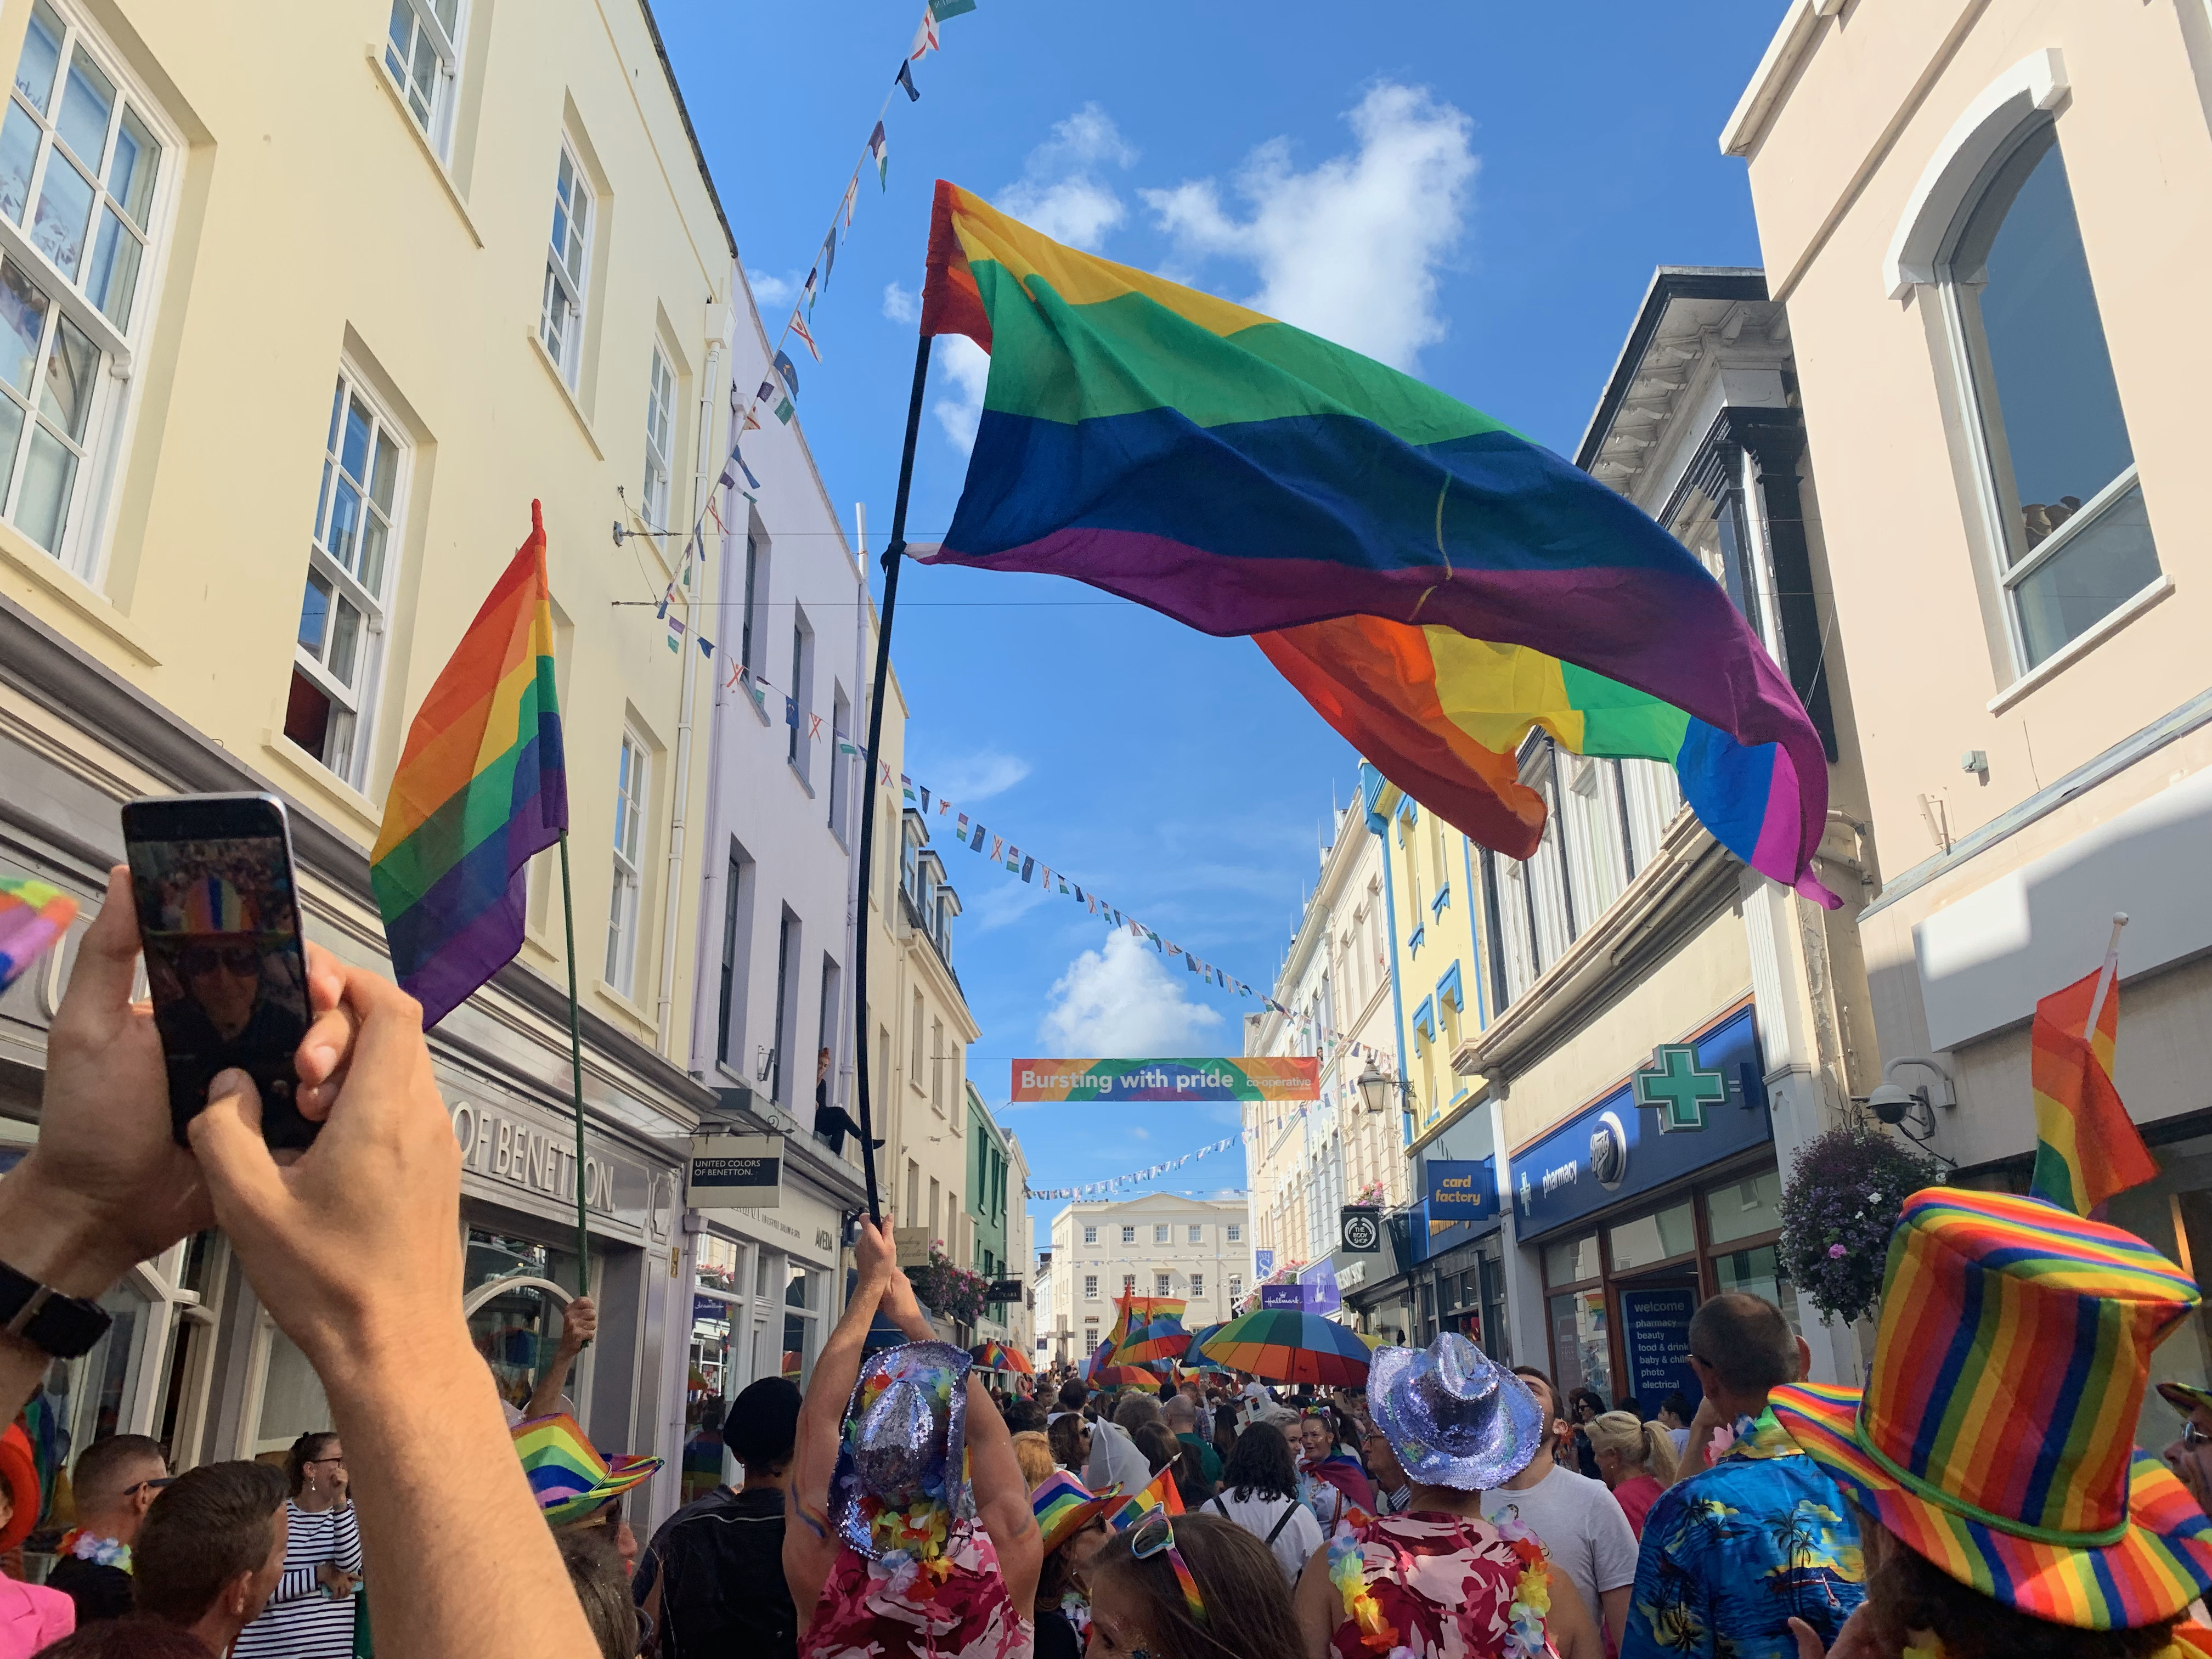 Jersey Price march through the high street. Many people in a crowd wearing brightly coloured clothing. Several people are waving pride flags and holding pride umbrellas